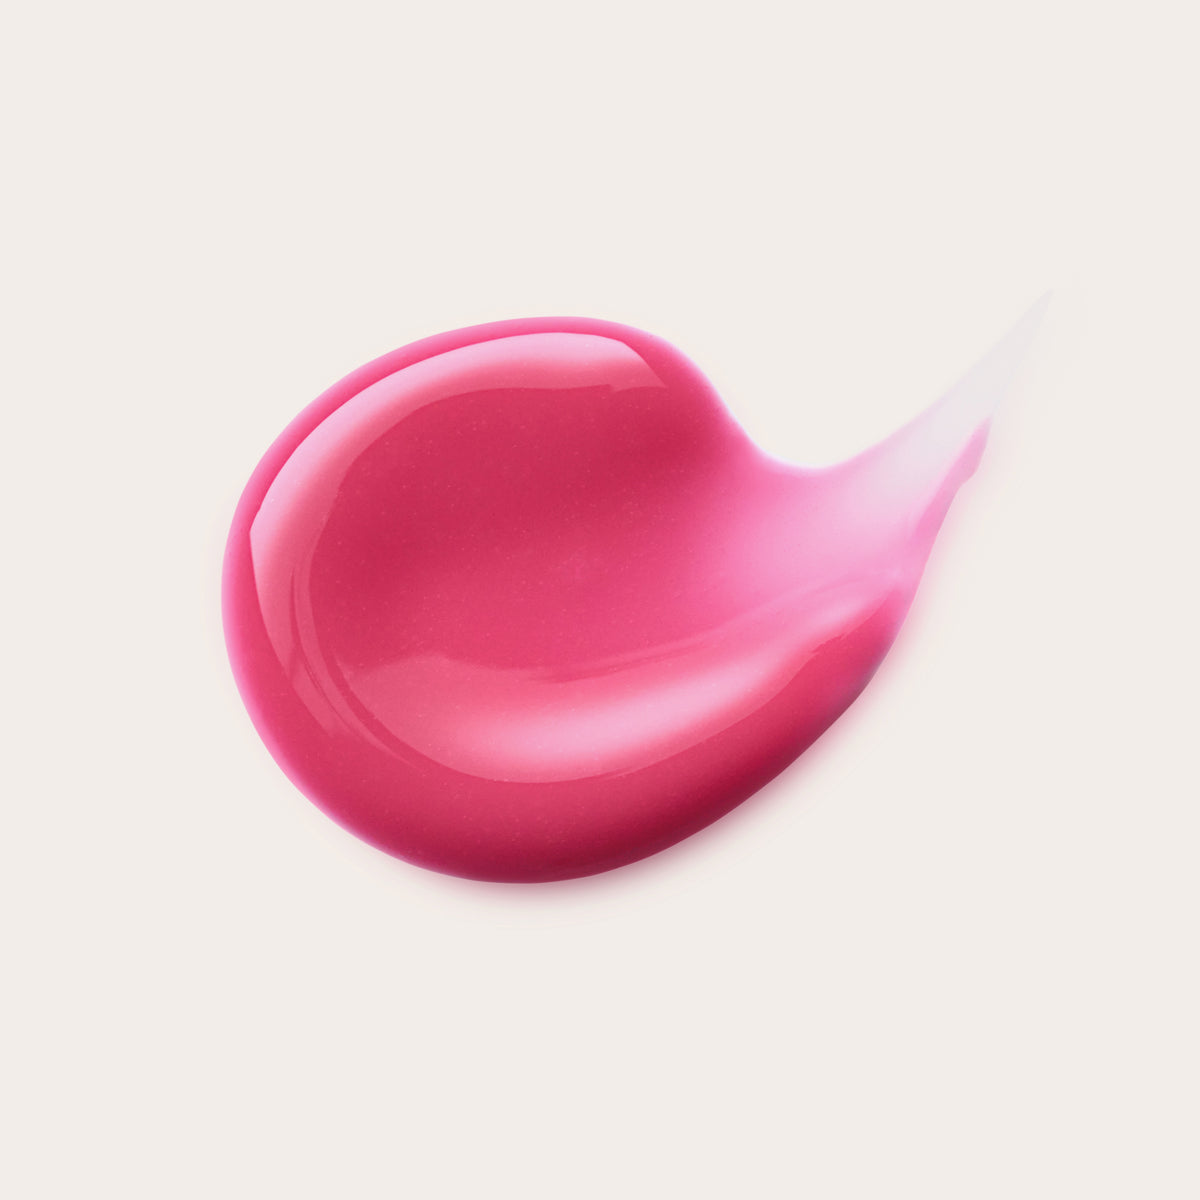 Plump It Up Lip Booster